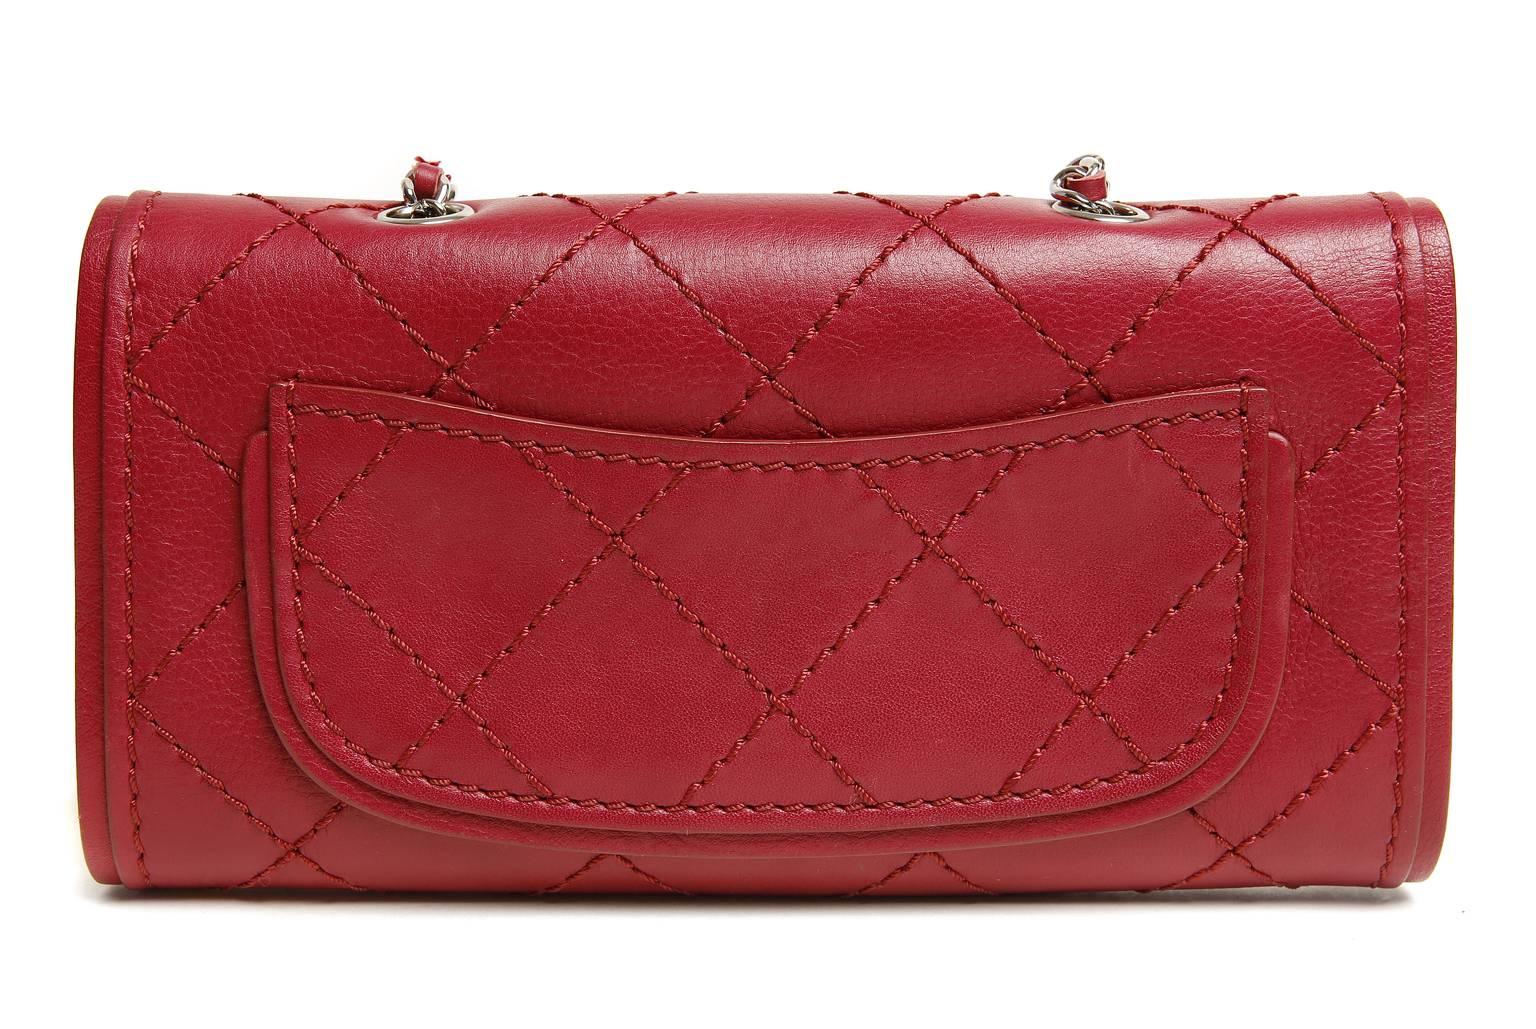 Chanel Red Leather Convertible Cross Body Bag- PRISTINE, Never Before Carried
  Similar to the WOC, this uniquely versatile Chanel can be carried as a clutch, cross the body, or tossed inside another bag as a wallet. 
 
Lipstick red leather is